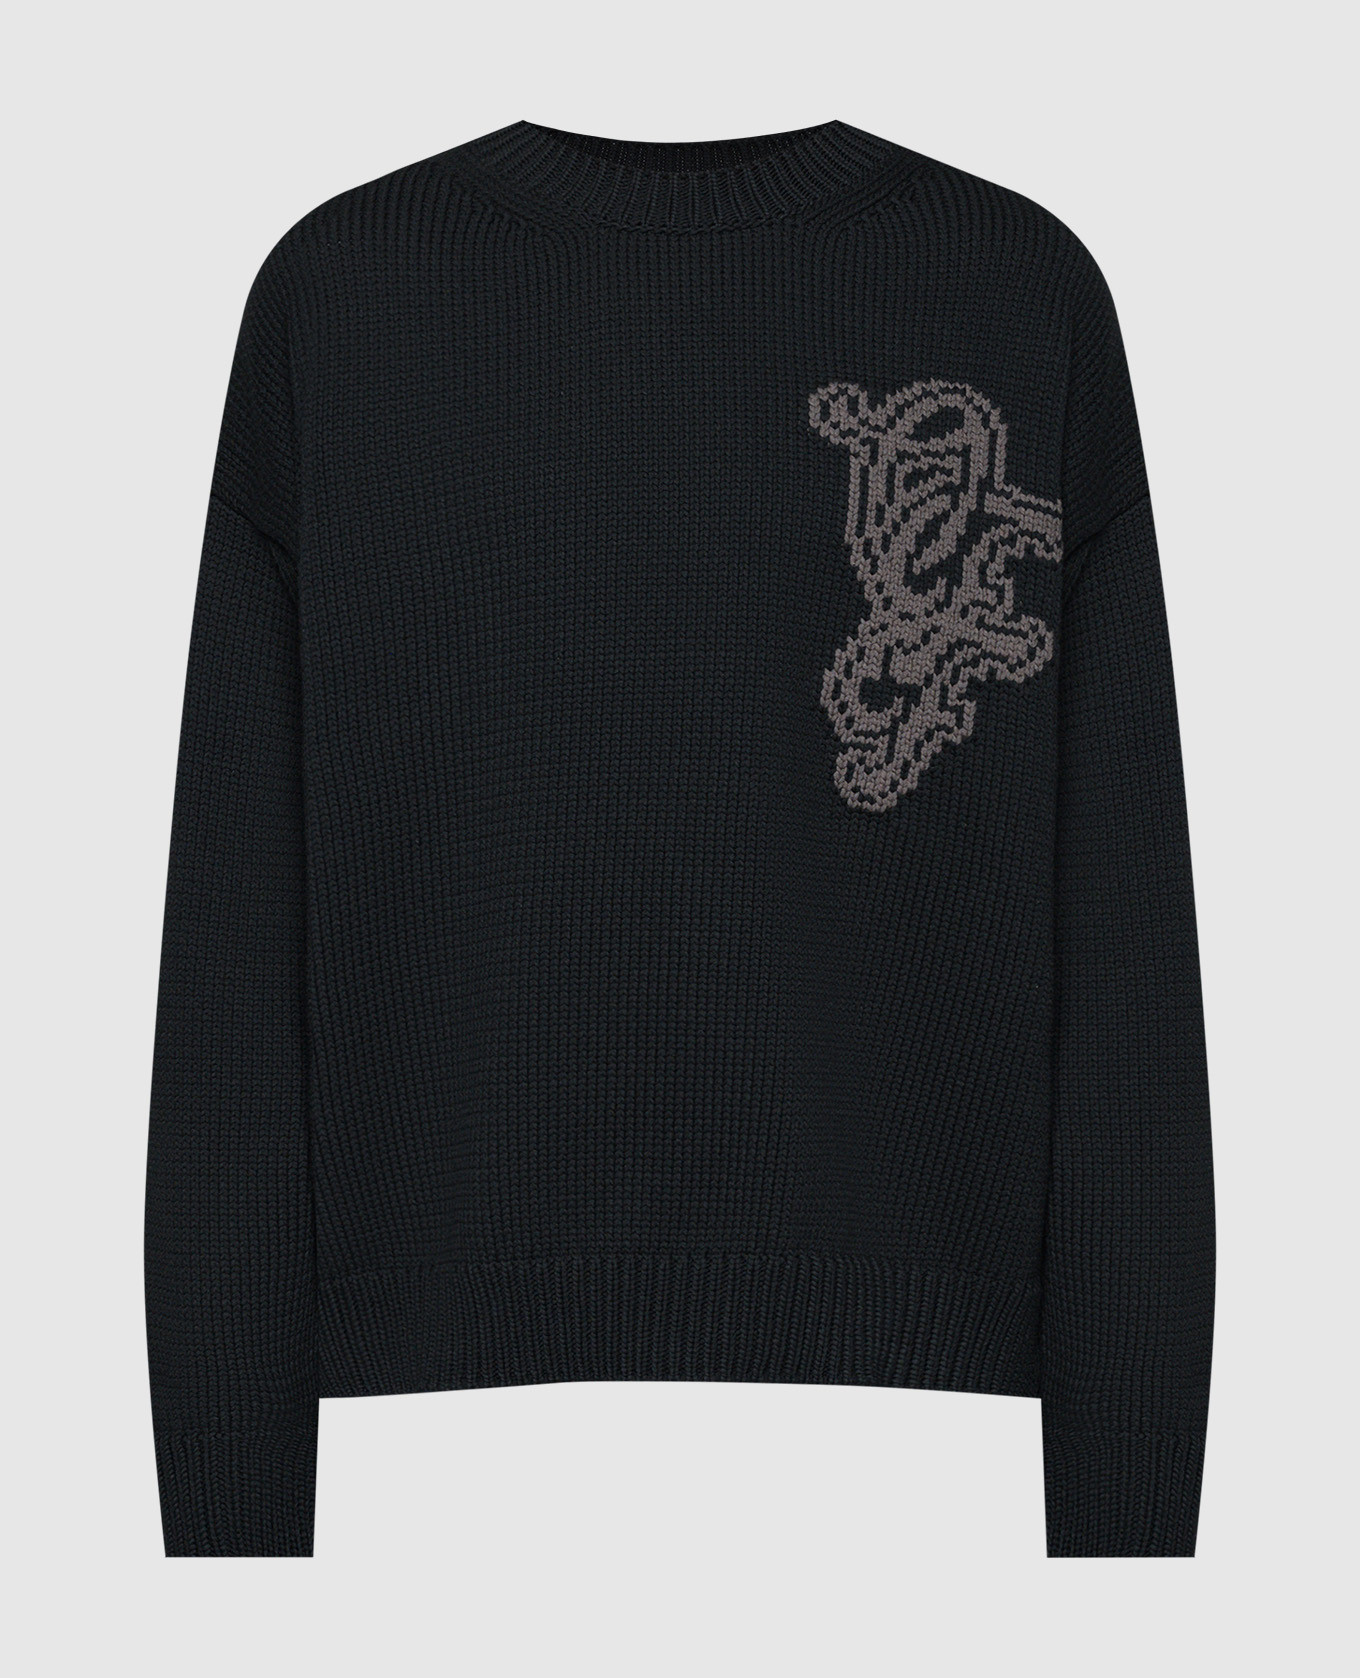 Natlover black sweater with logo pattern